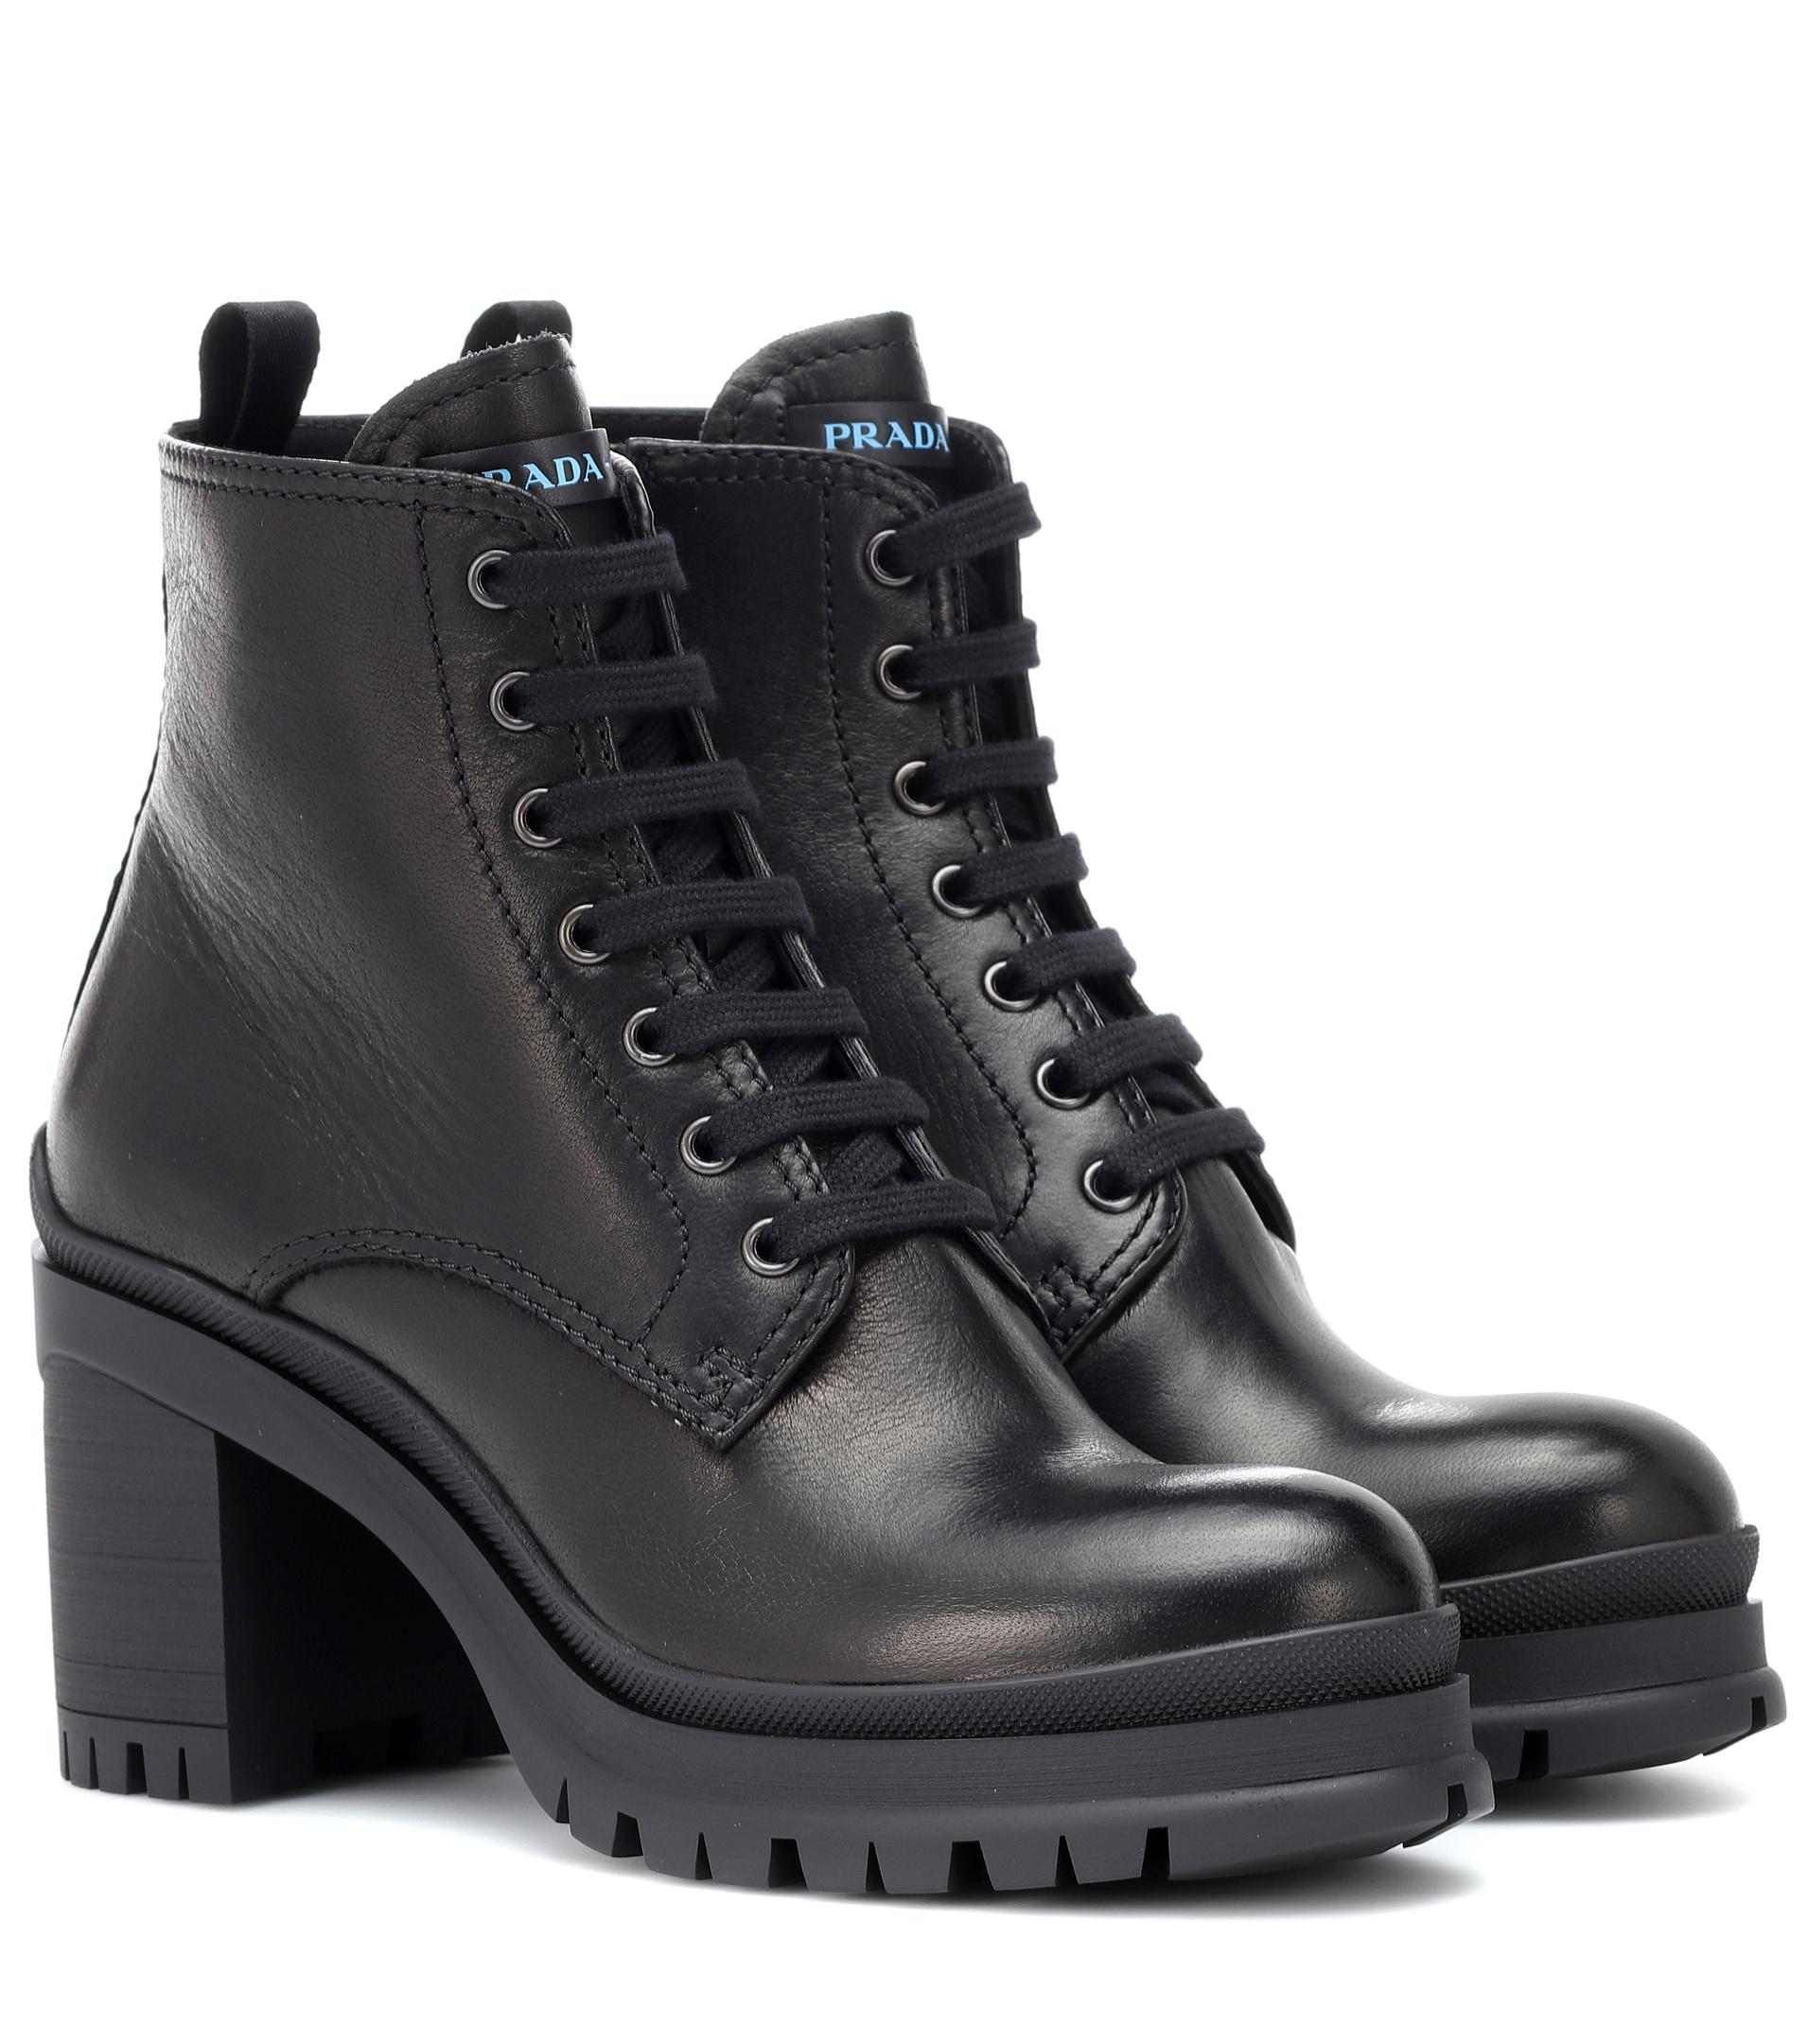 Prada Leather Ankle Boots in Black - Save 2% - Lyst